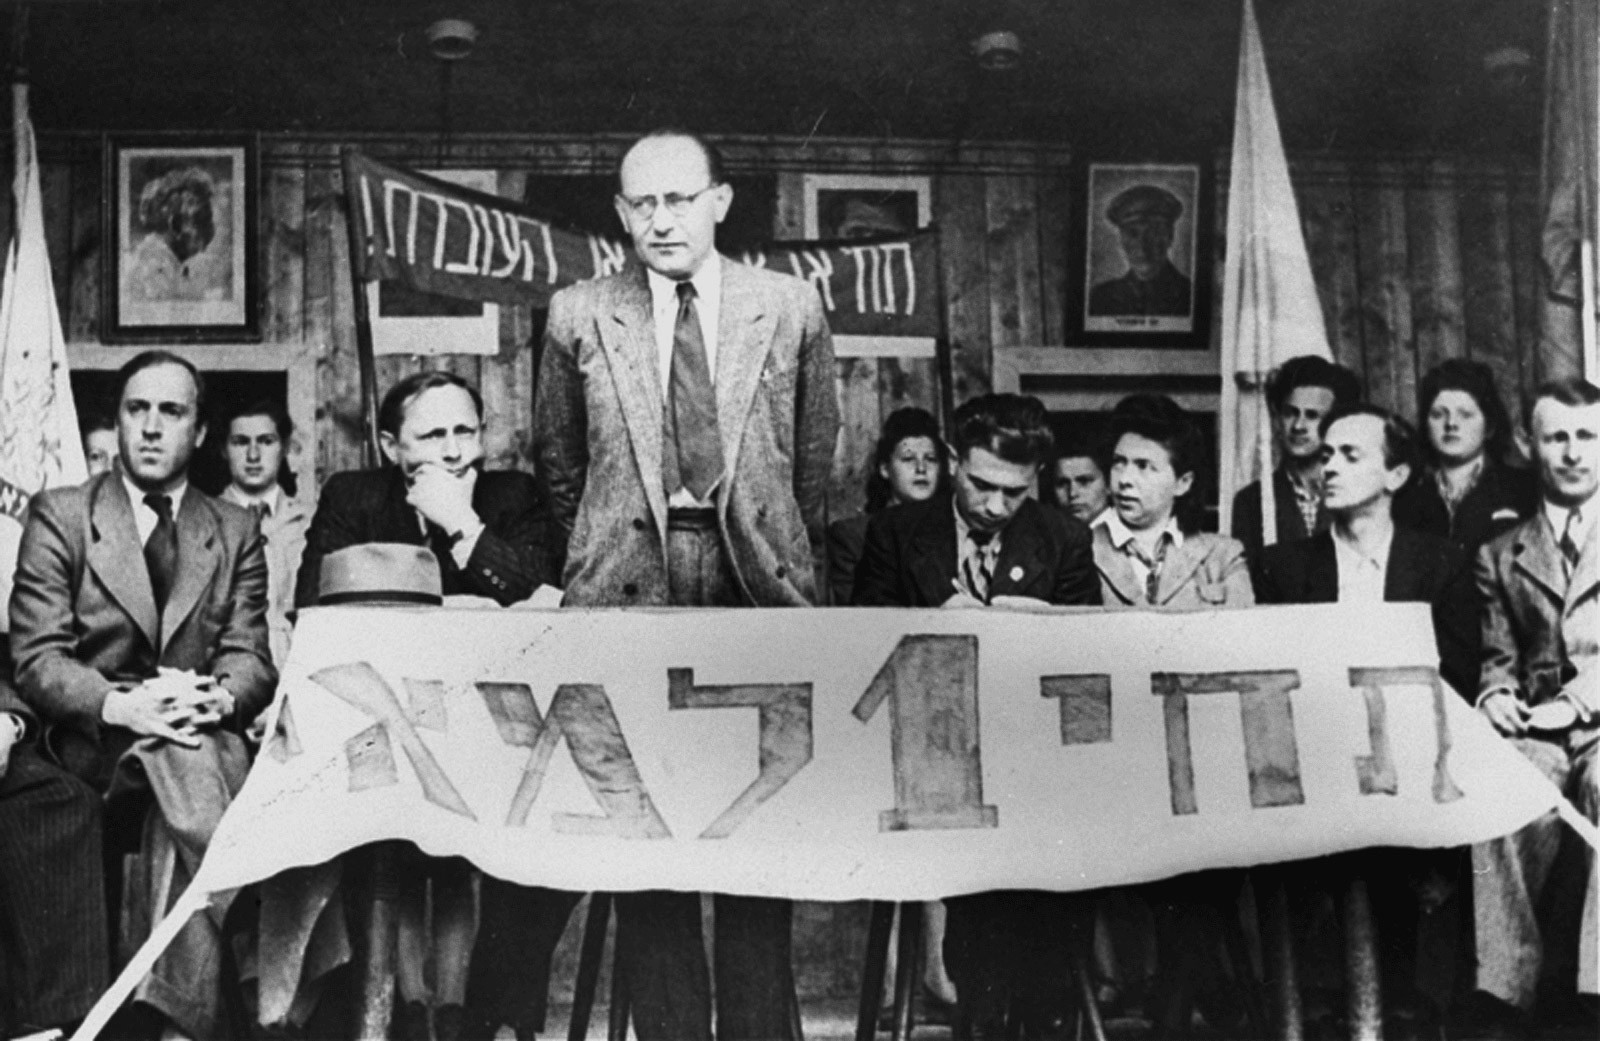 May 1st, holiday of the working class: Chaim Yahil as emissary of the Jewish Agency with survivors of Nazi persecution (“Displaced Persons”) in the DP Camp of München-Neu-Freimann (1946 / 1948).  The Jewish Agency organized Jewish immigration to Palestine.  Photo: Jack Sutin / United States Holocaust Memorial Museum, courtesy of Saul Sorrin. der NS-Verfolgung („Displaced Persons“) im DP-Camp München-Neu-Freimann (1946 / 1948). Die Jewish Agency organisierte die Einwanderung nach Palästina.  Foto: Jack Sutin / United States Holocaust Memorial Museum, courtesy of Saul Sorrin